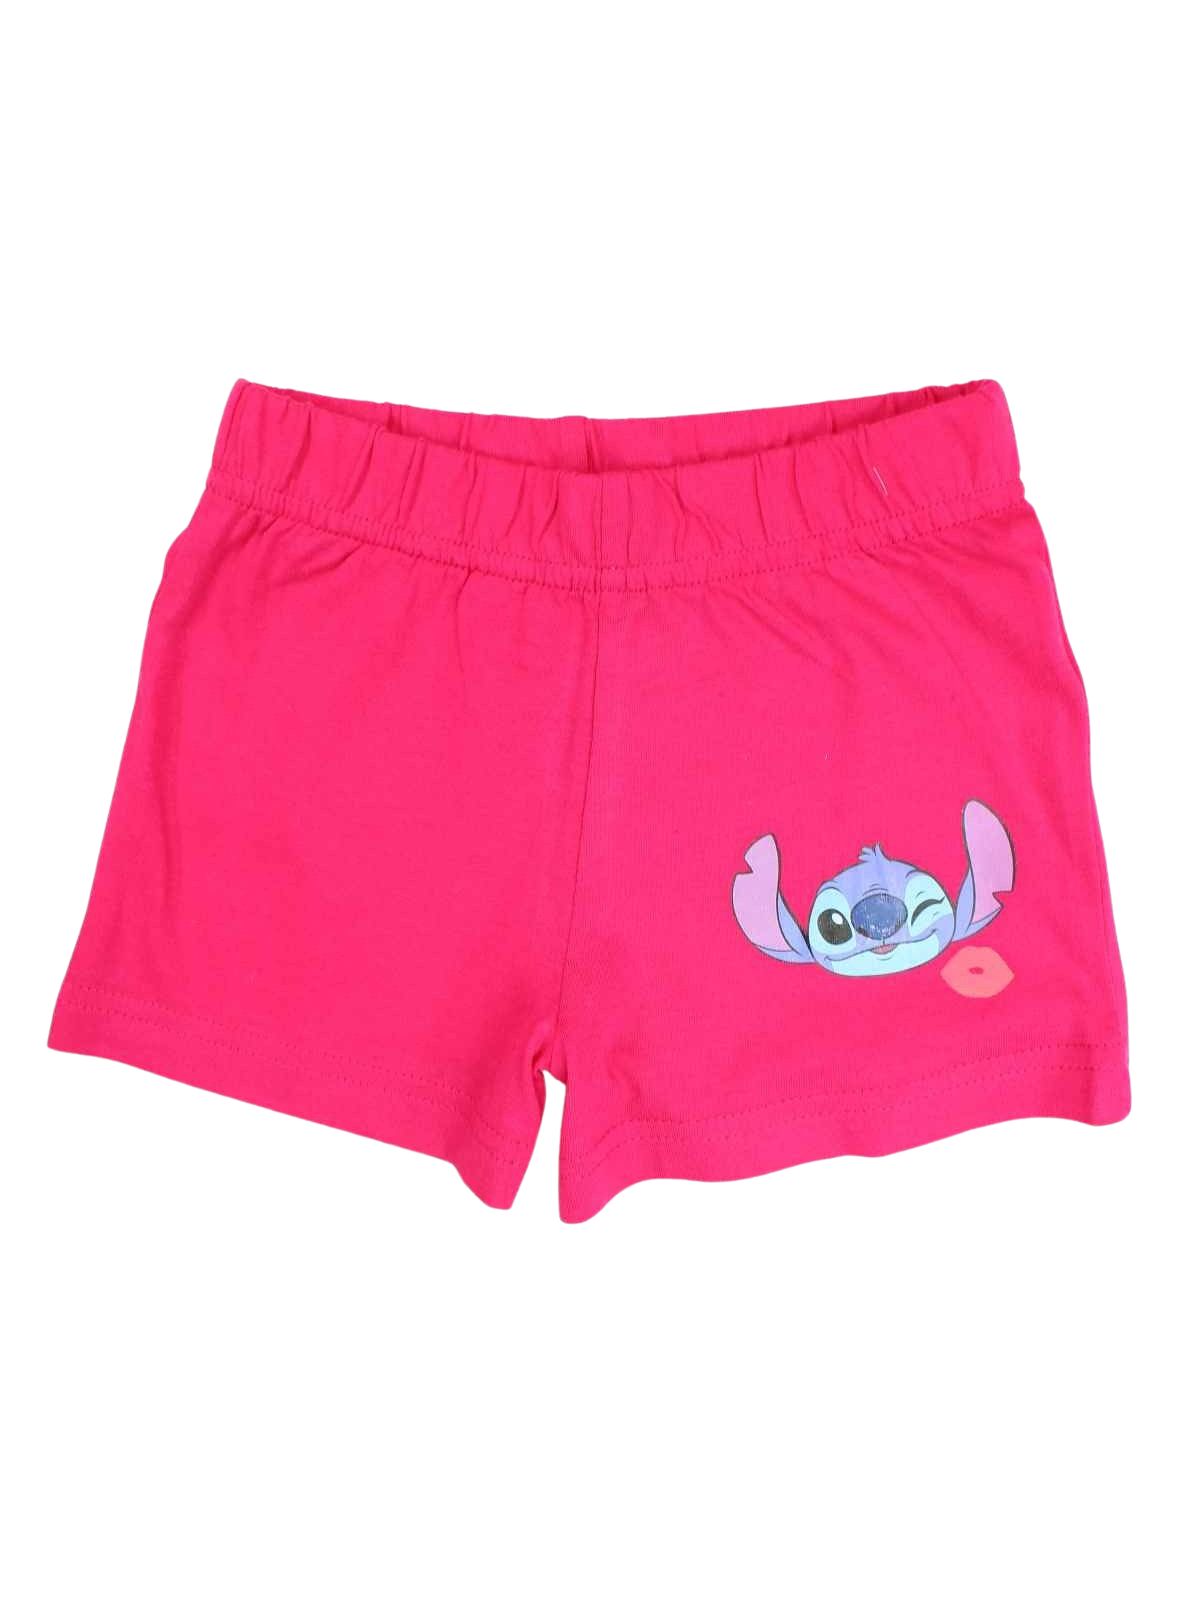 https://www.kiddystores.fr/115856-product_zoom/lilo-stitch-clothing-of-2-pieces.jpg